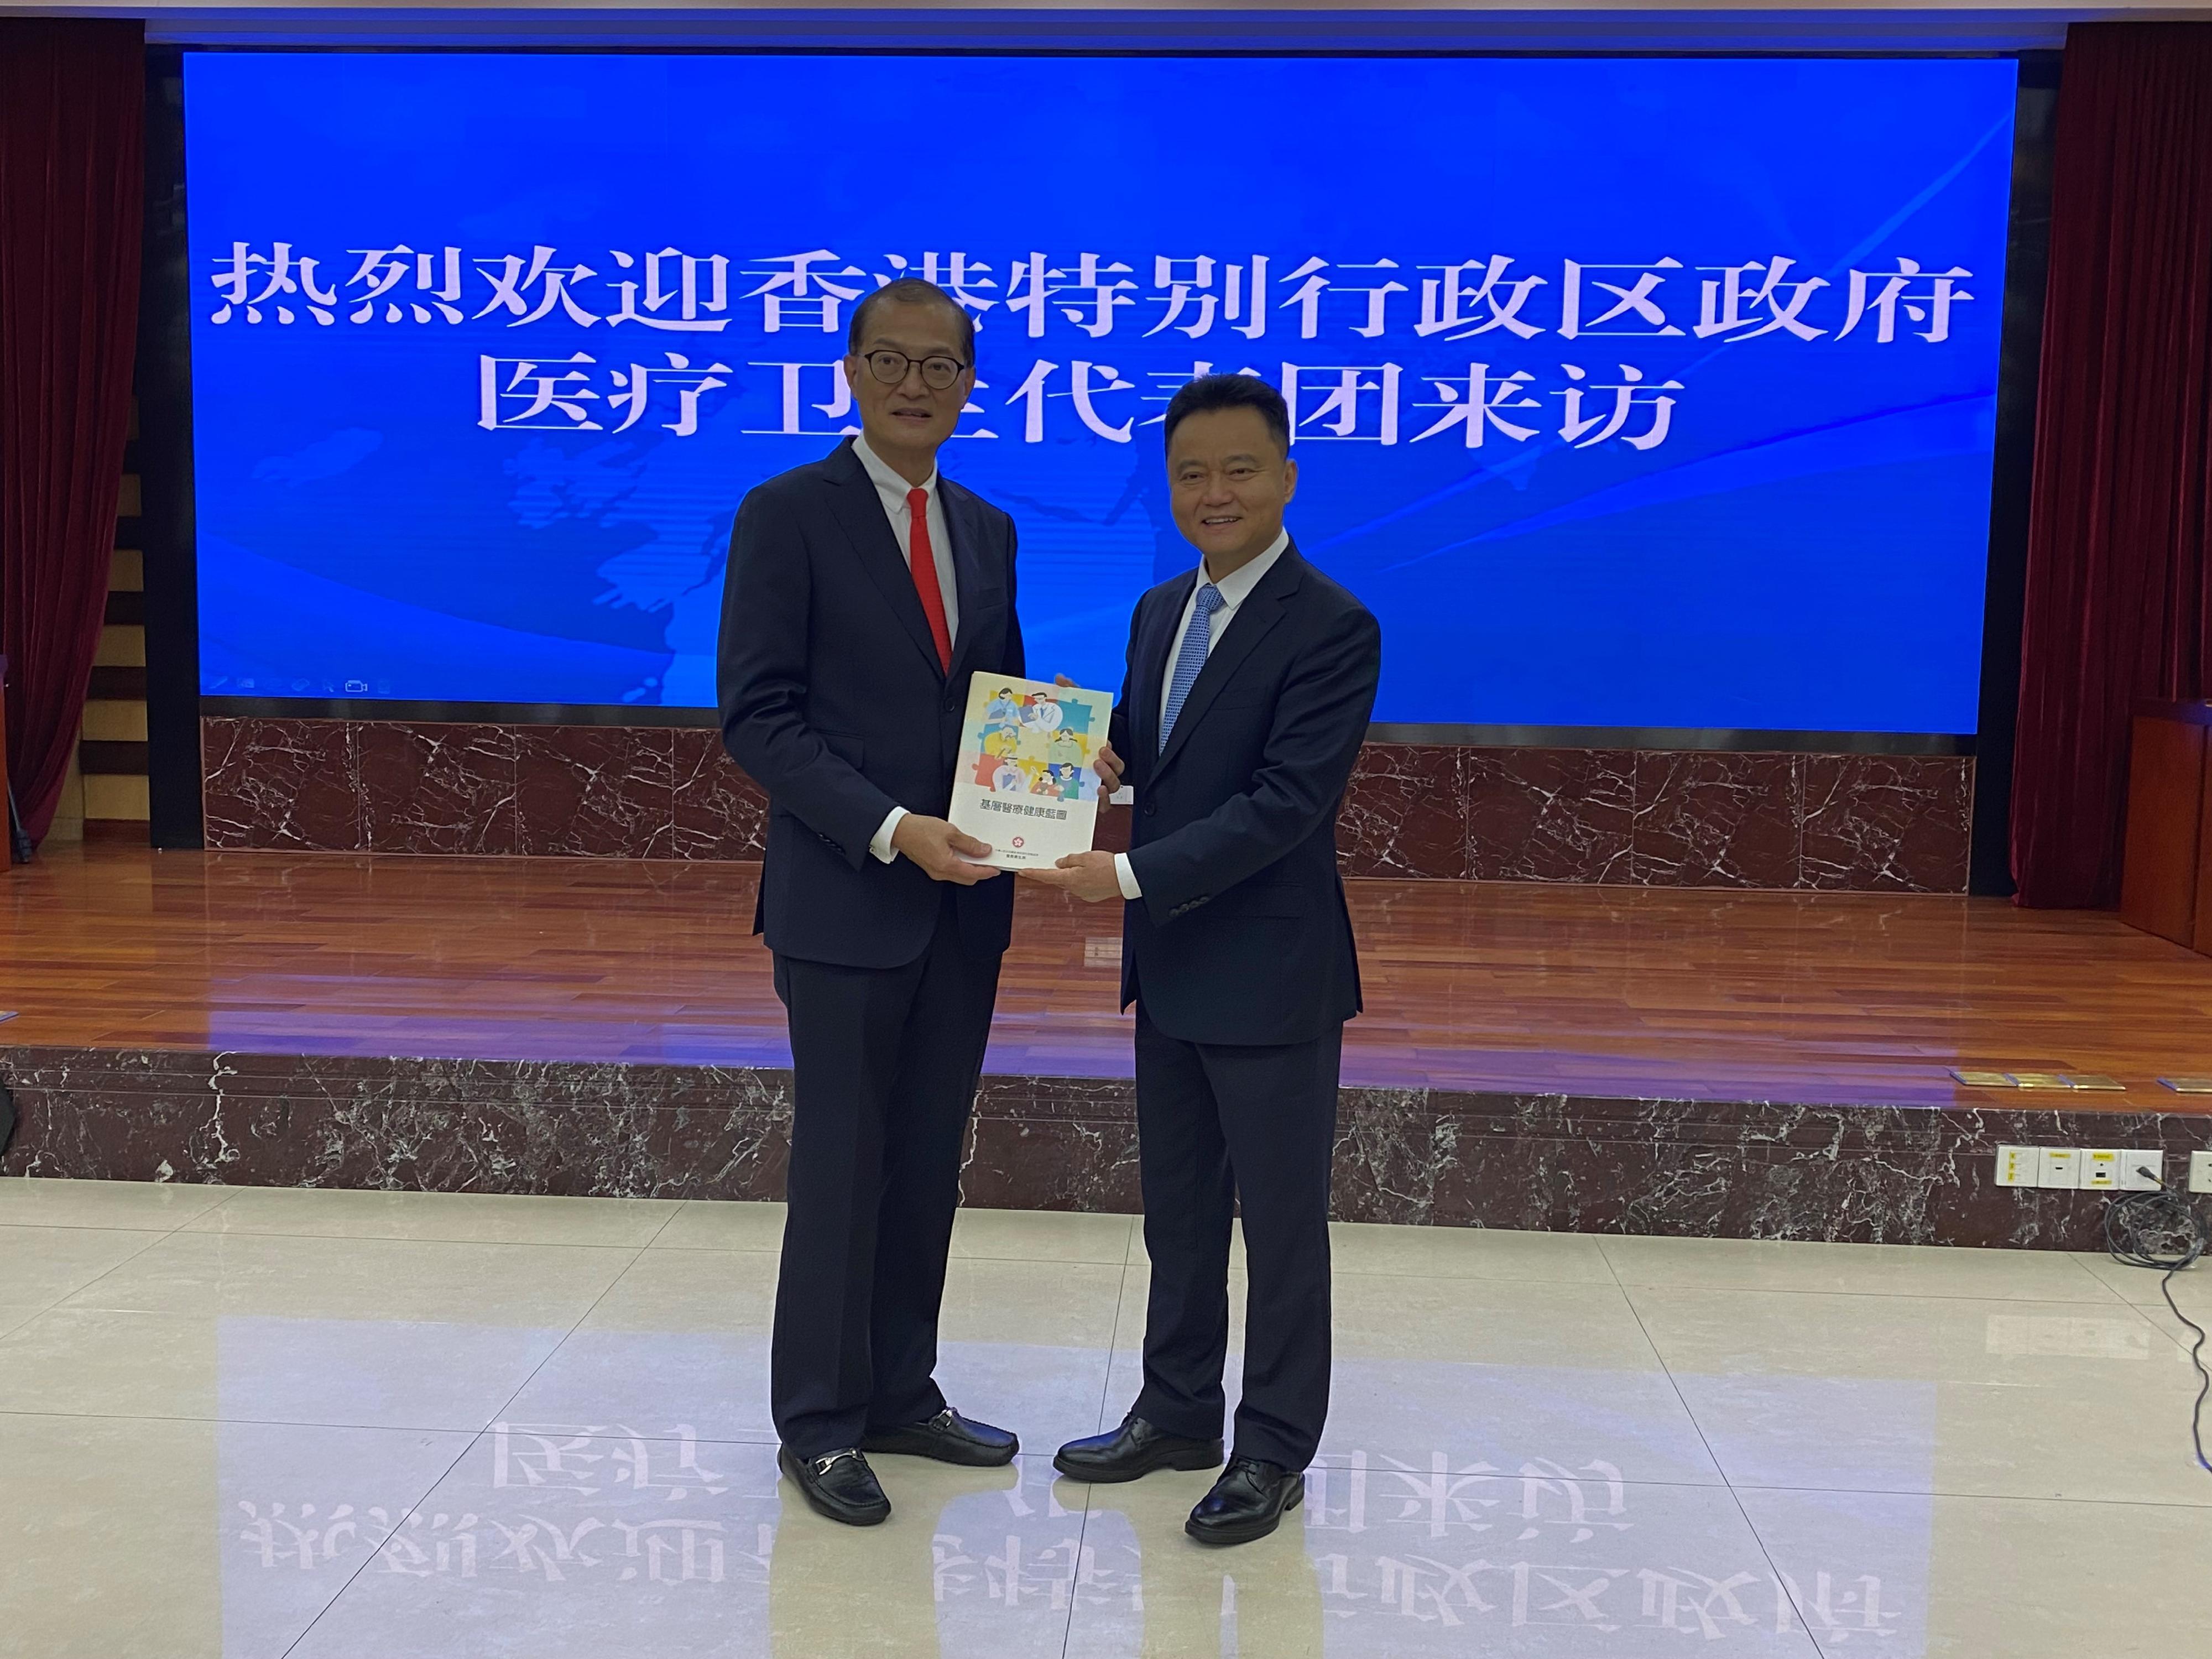 The Secretary for Health, Professor Lo Chung-mau, led his delegation to visit the Health Commission of Guangdong Province today (March 29). Photo shows Professor Lo (left) presenting the Primary Healthcare Blueprint released last year to the Party Secretary and Director of the Health Commission of Guangdong Province, Mr Zhu Hong (right).